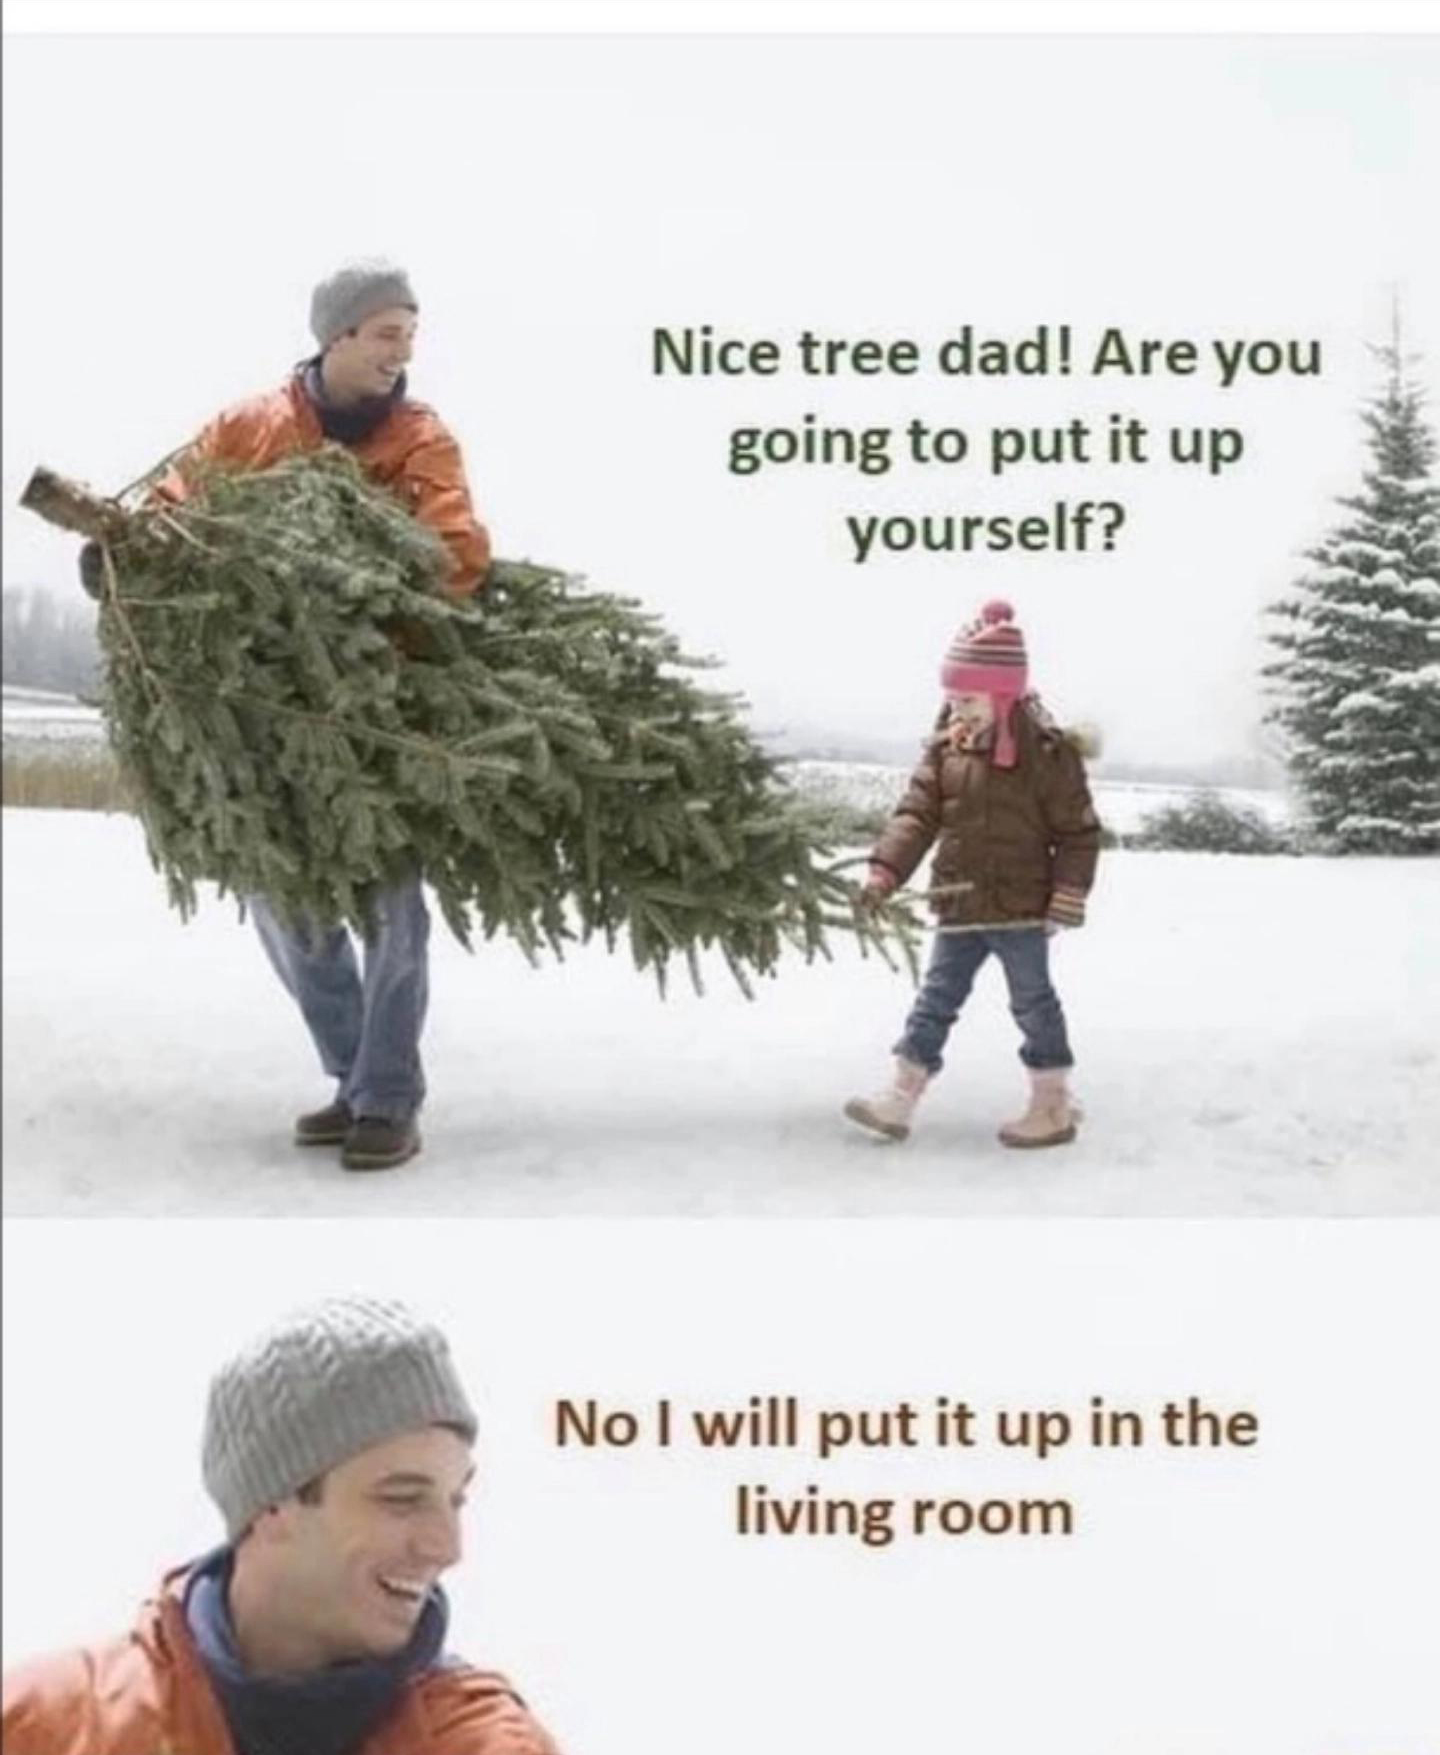 dank memes - funny memes - nice tree dad meme - Nice tree dad! Are you going to put it up yourself? No I will put it up in the living room